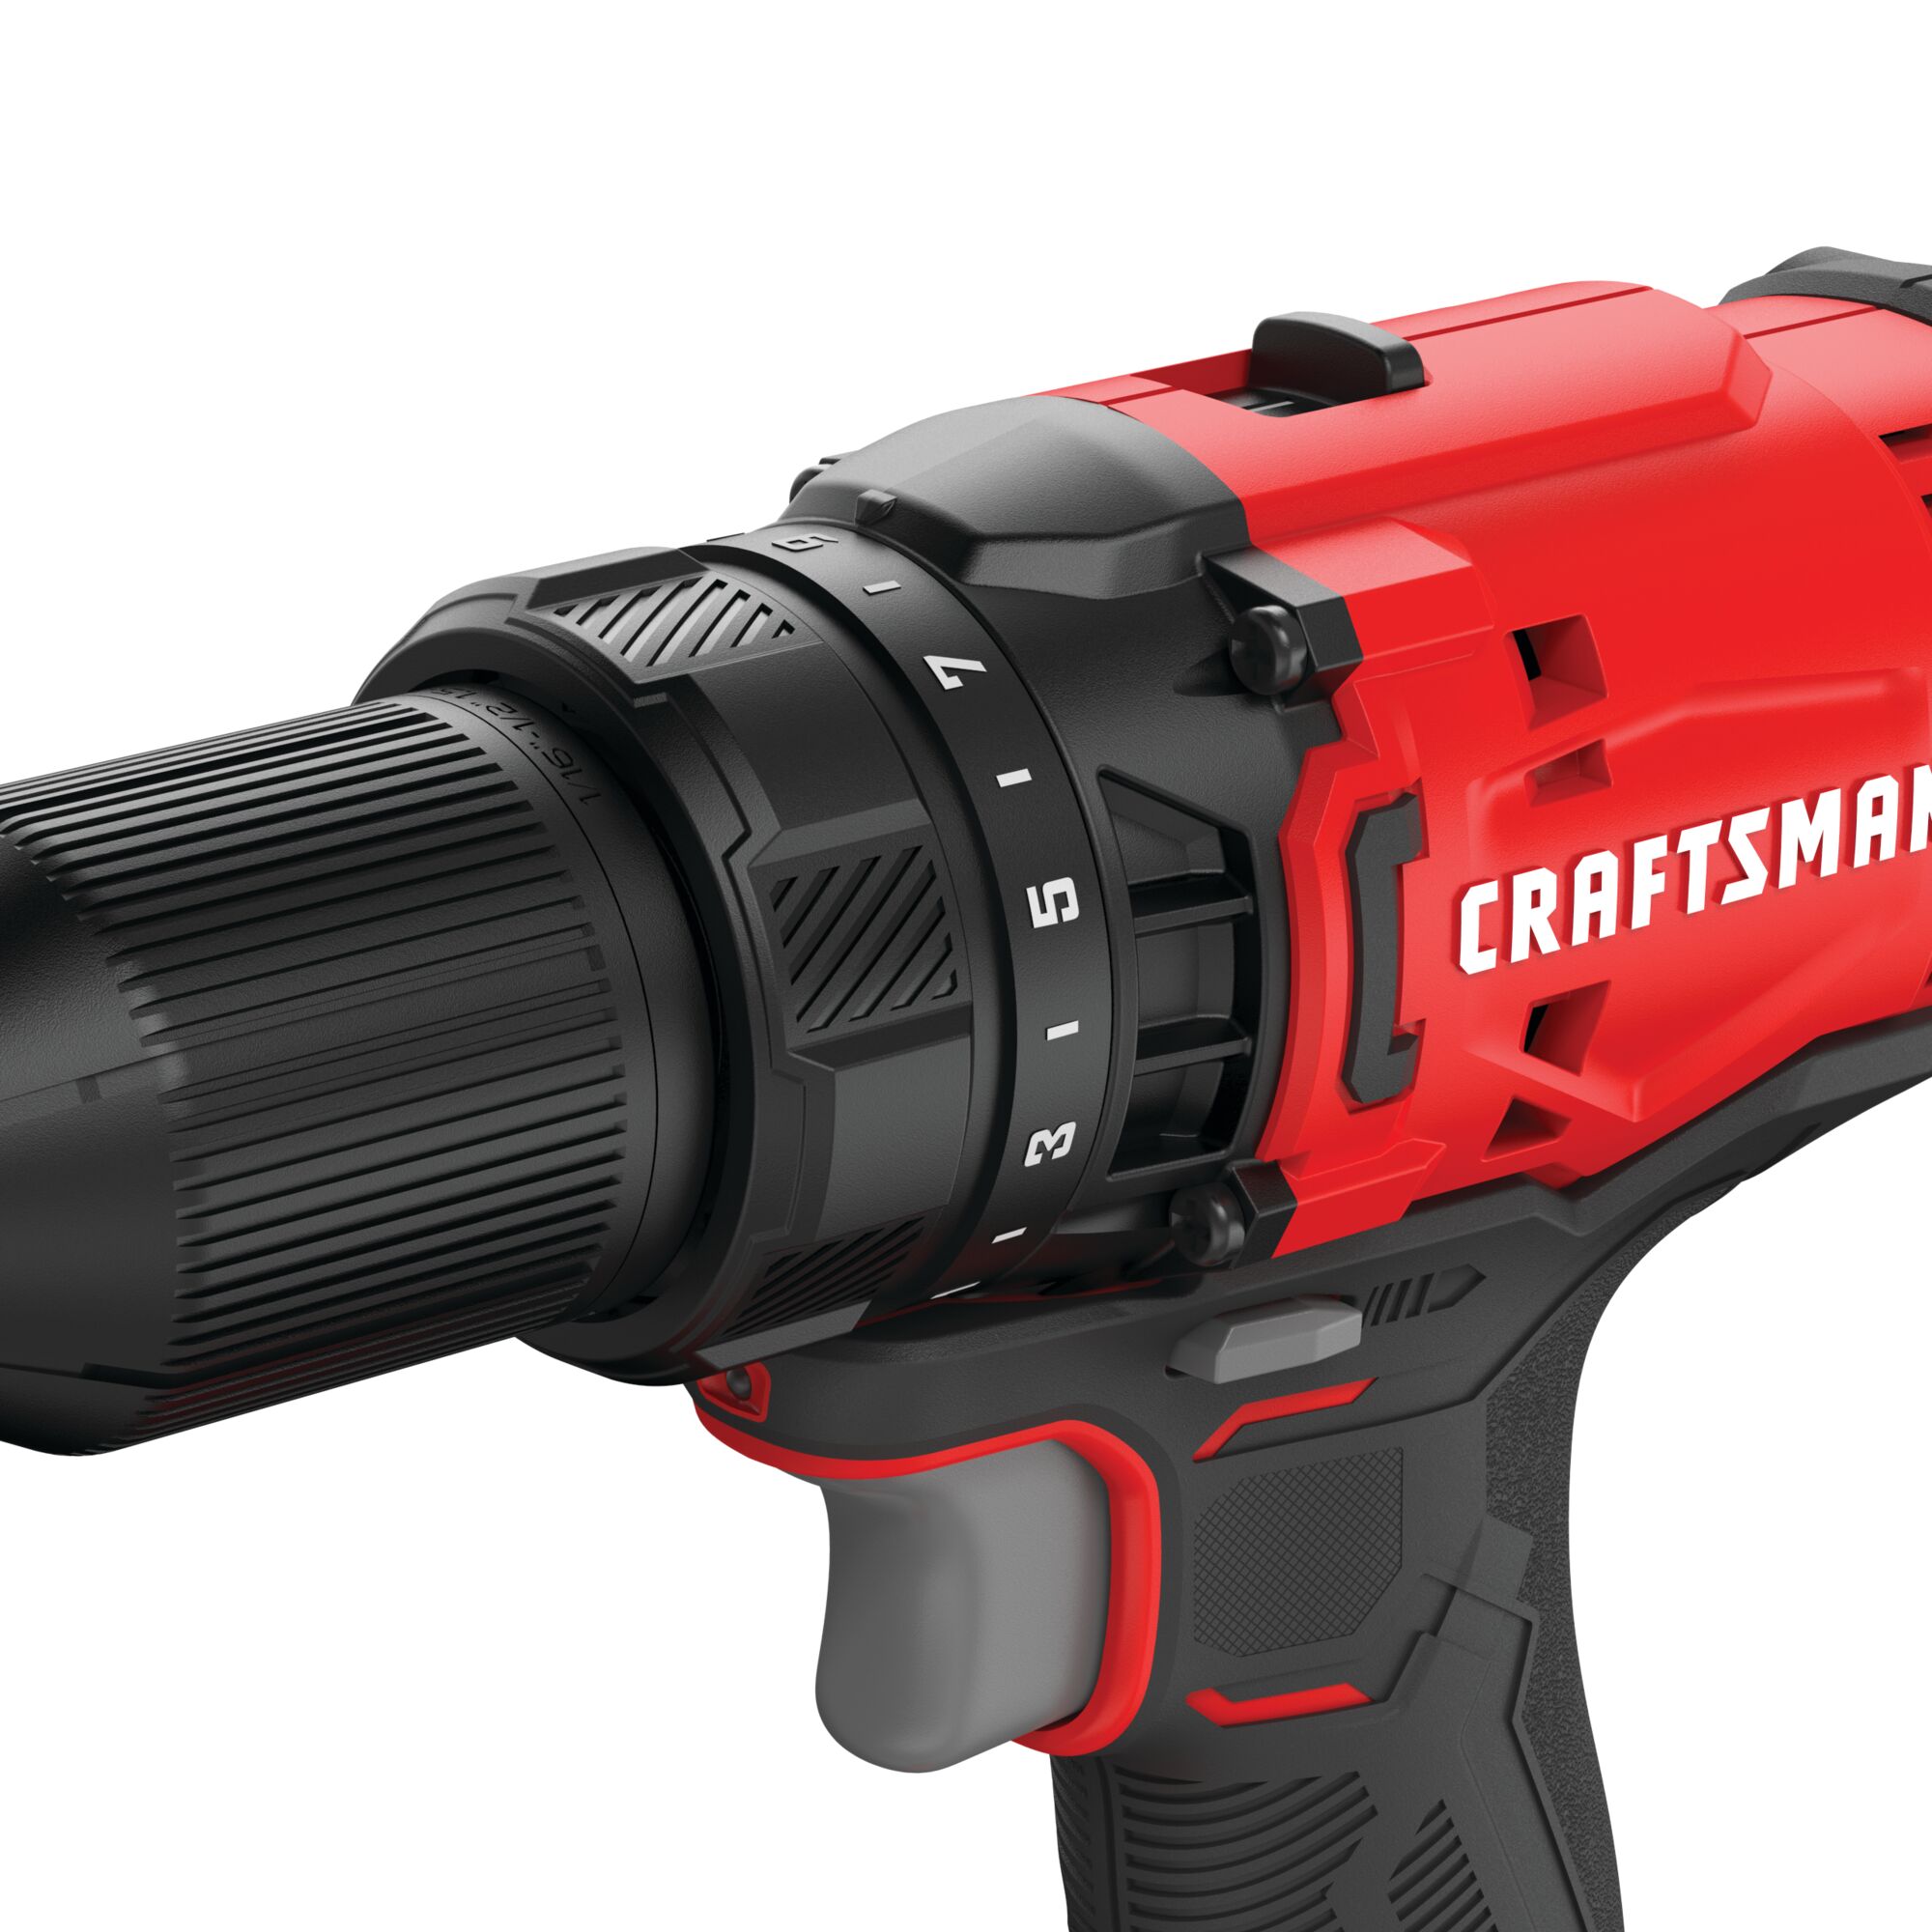 View of CRAFTSMAN Combo Kits: Power Tools highlighting product features